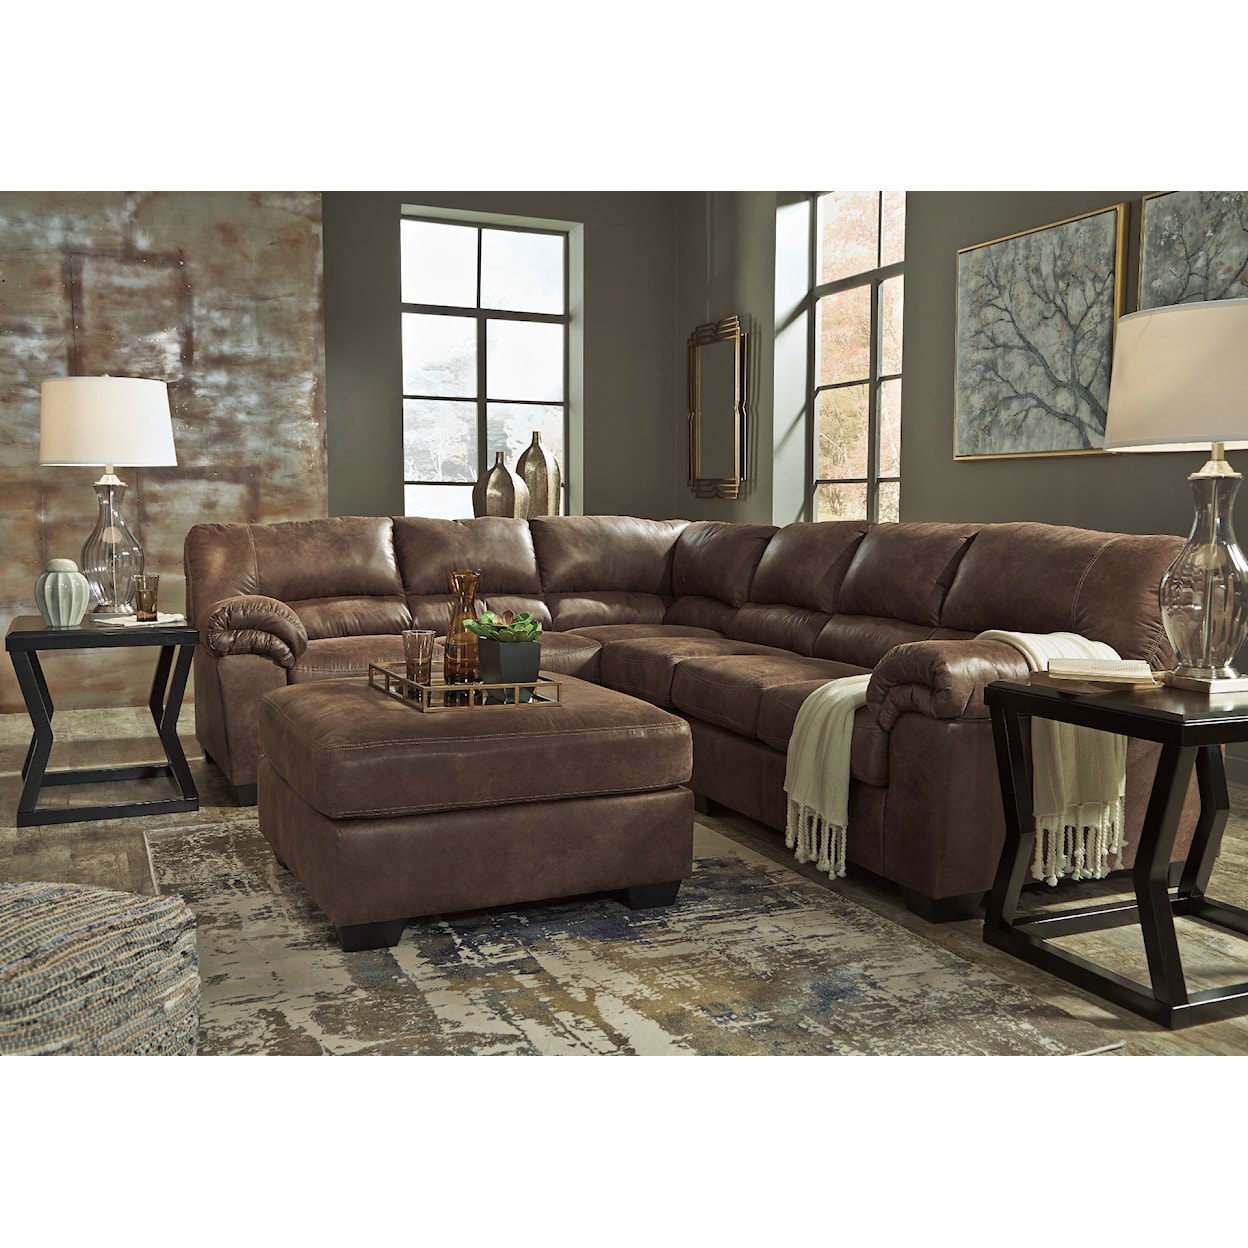 Signature Design Bladen 3-Piece Sectional with Ottoman